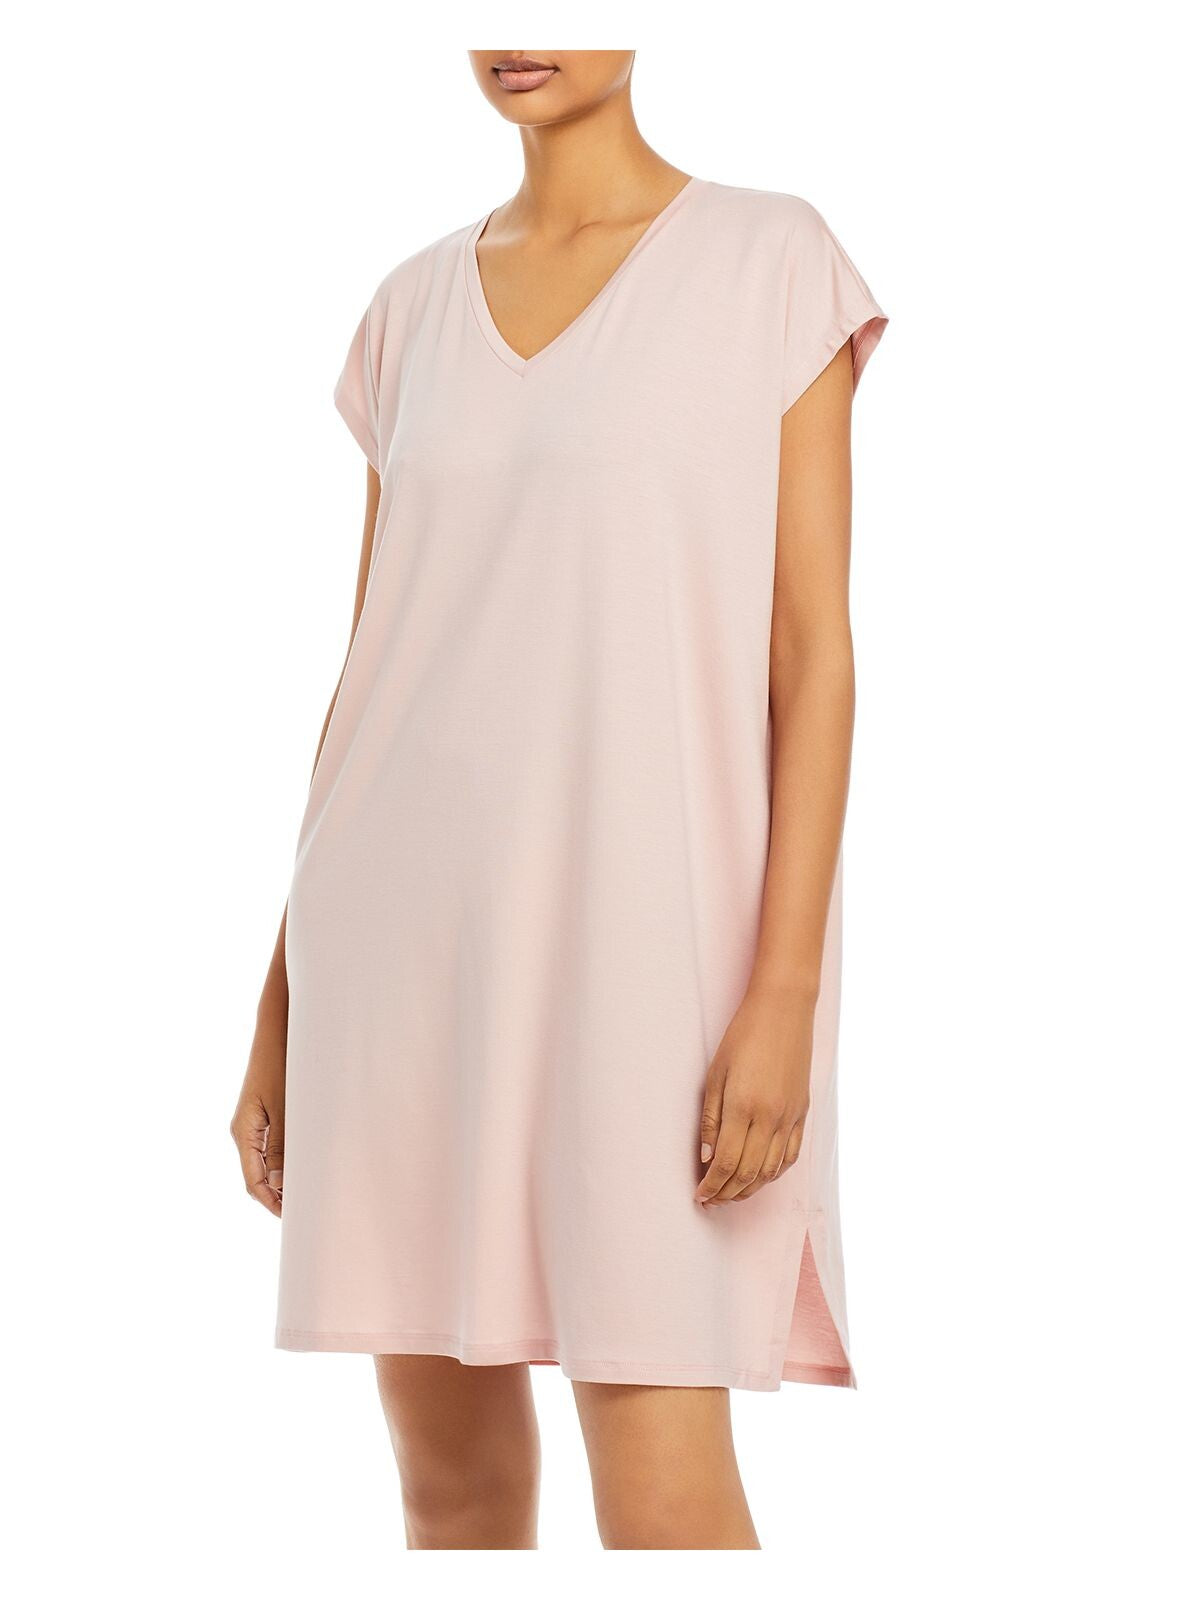 EILEEN FISHER Womens Pink Stretch Cap Sleeve V Neck Above The Knee Shift Dress S